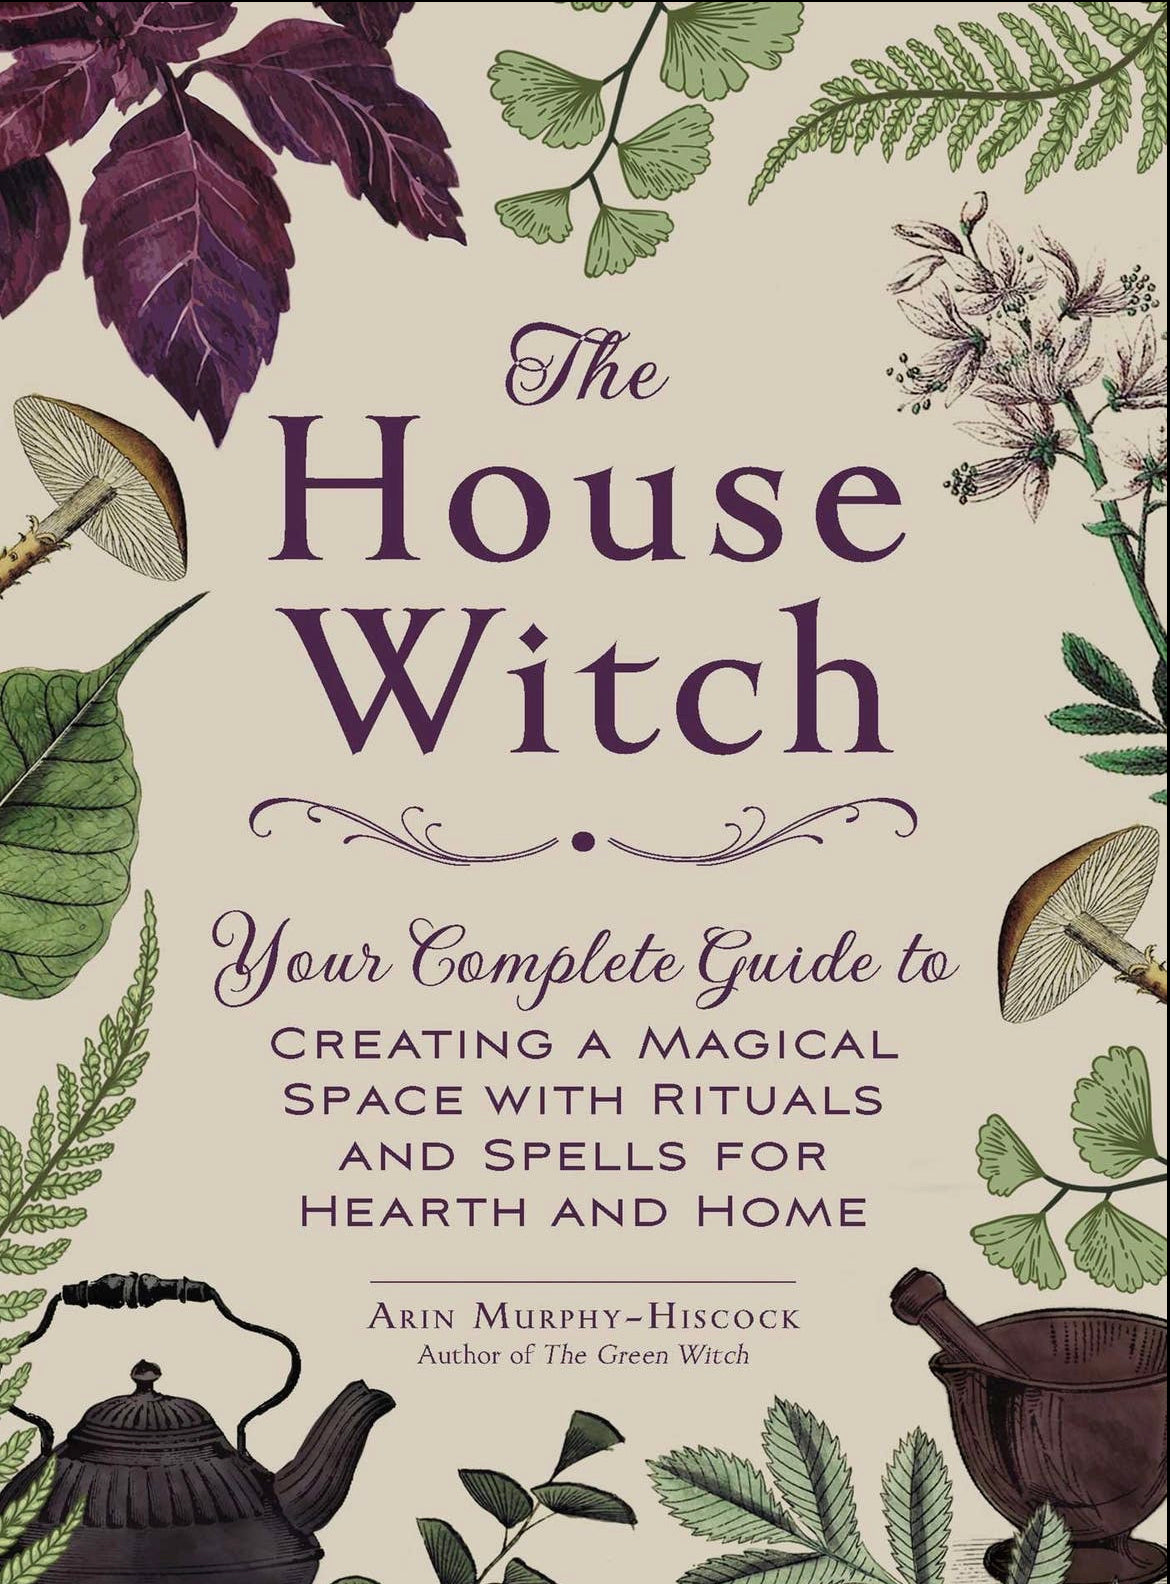 The House Witch: Your Complete Guide